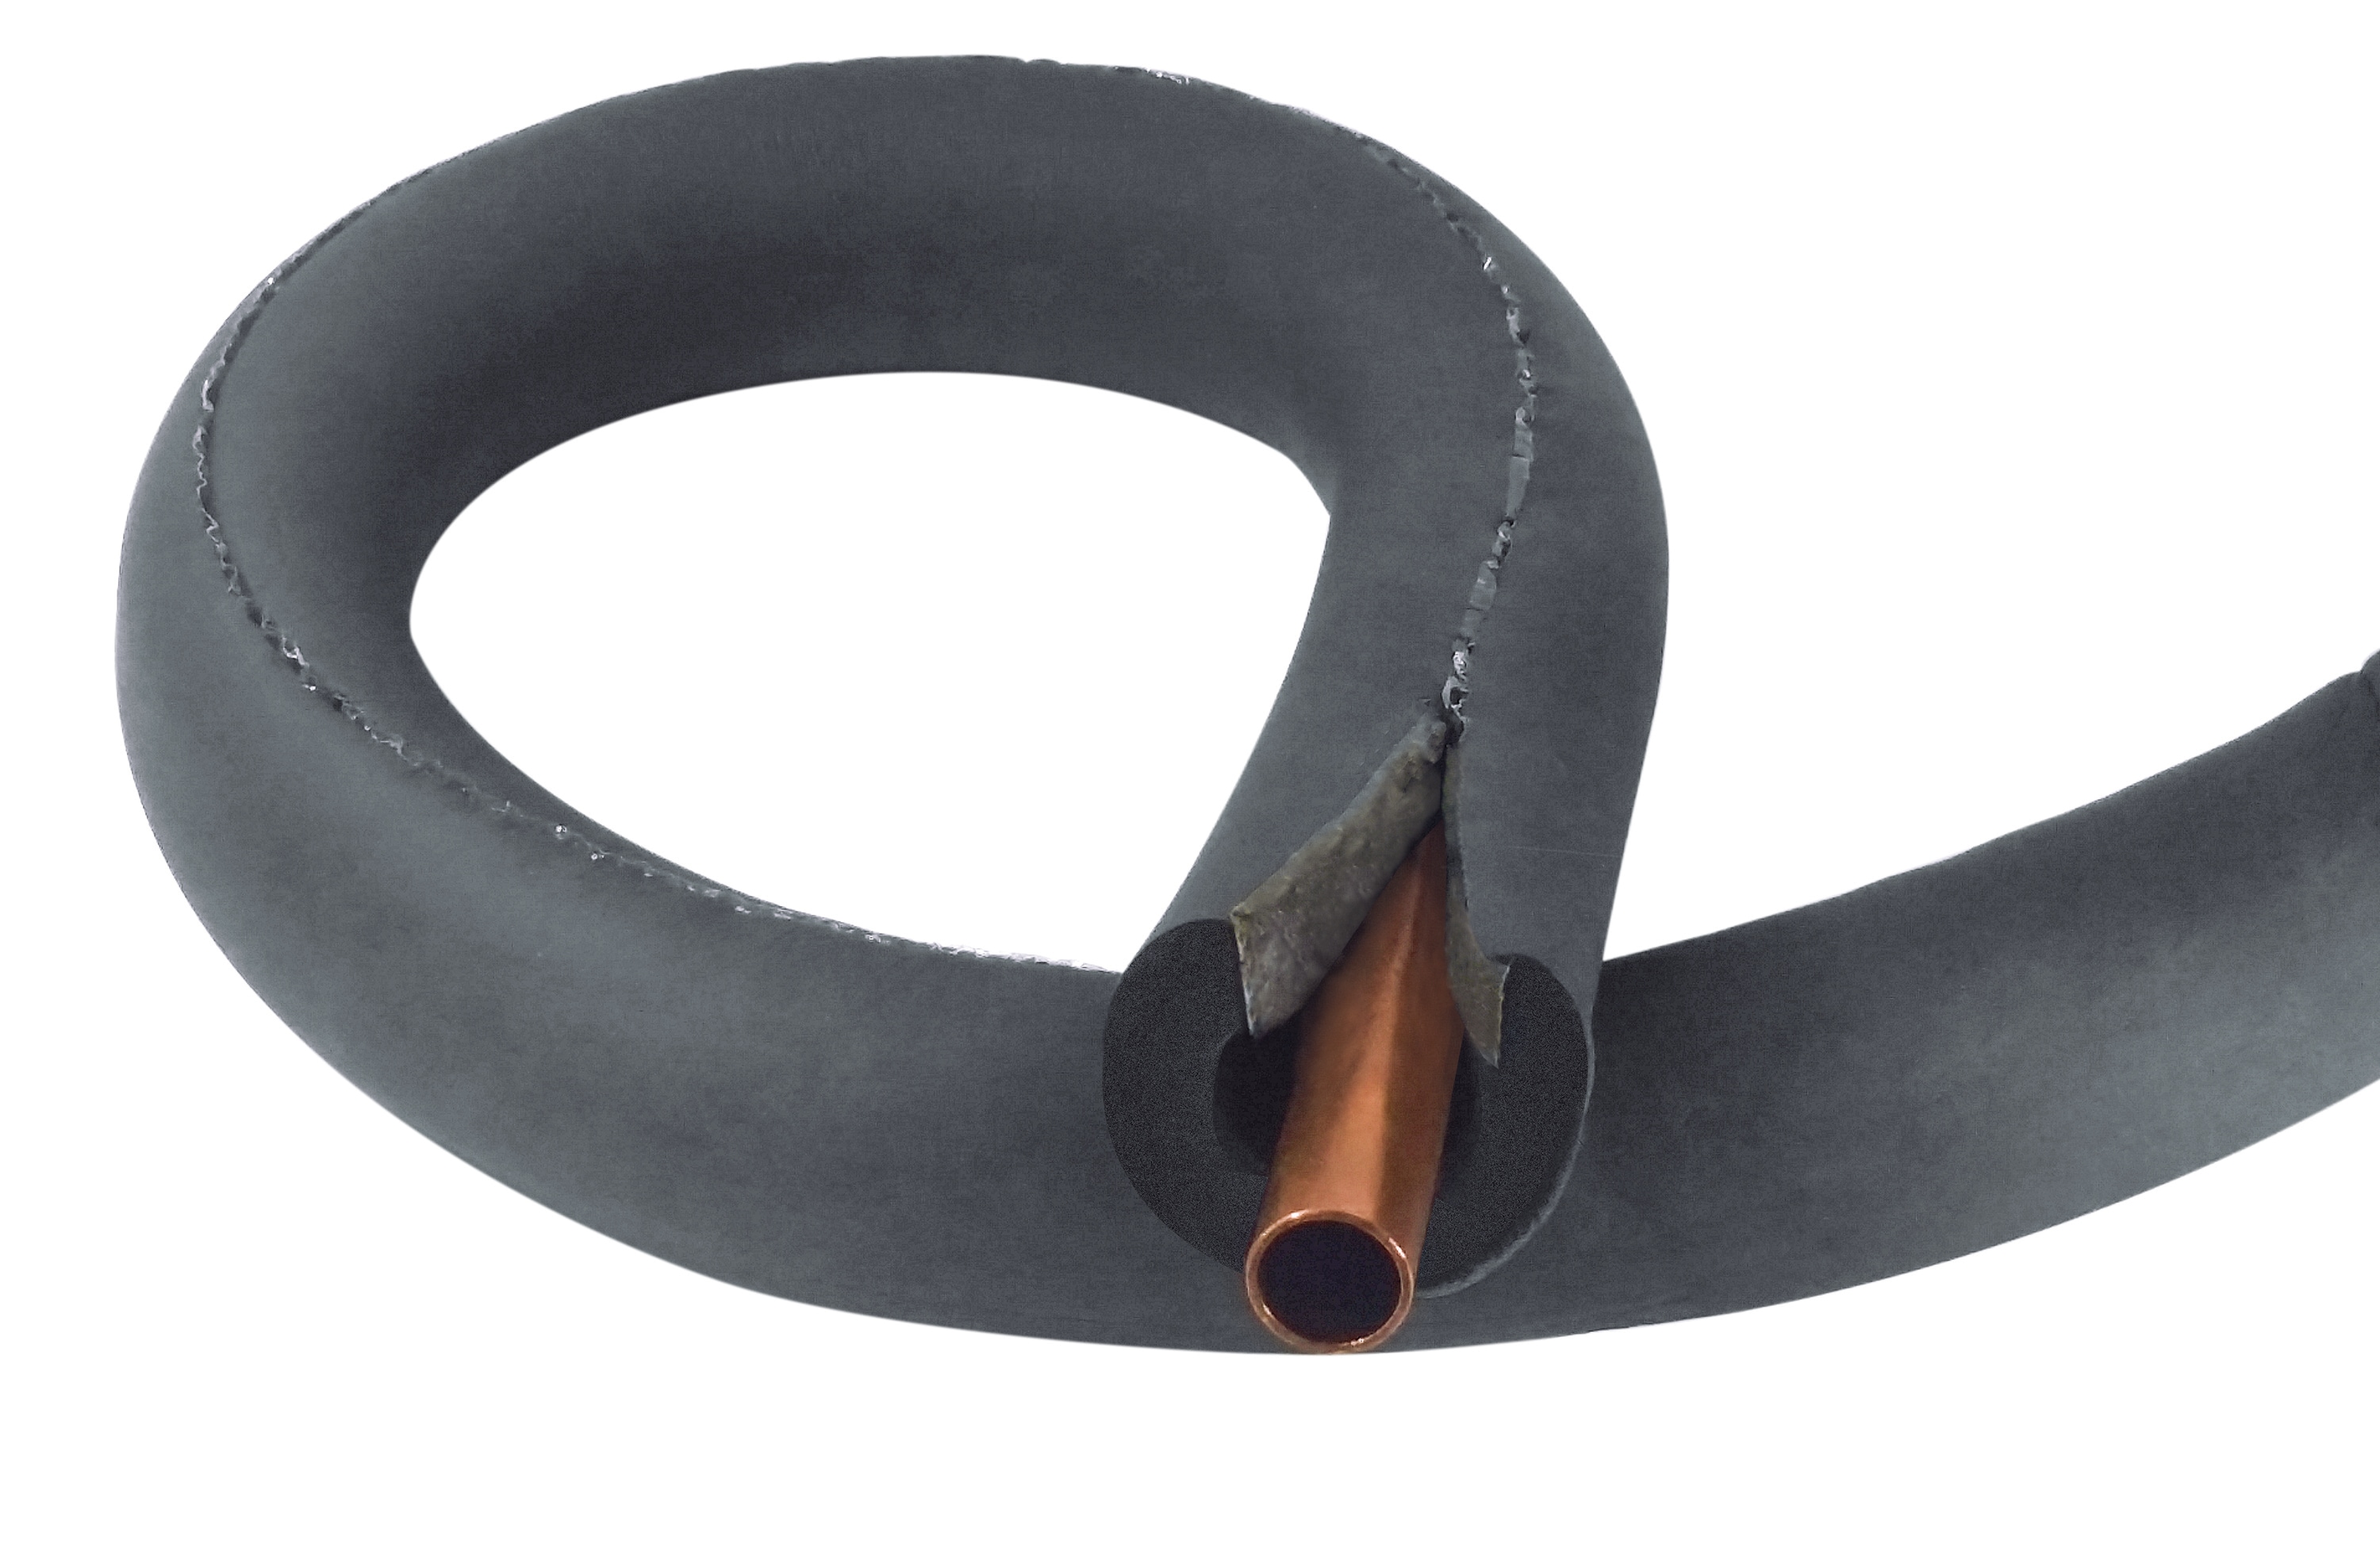 K-Flex 1/2 in. x 6 ft. Rubber Self-Seal Pipe Wrap Insulation 6RTL048058-HD  - The Home Depot